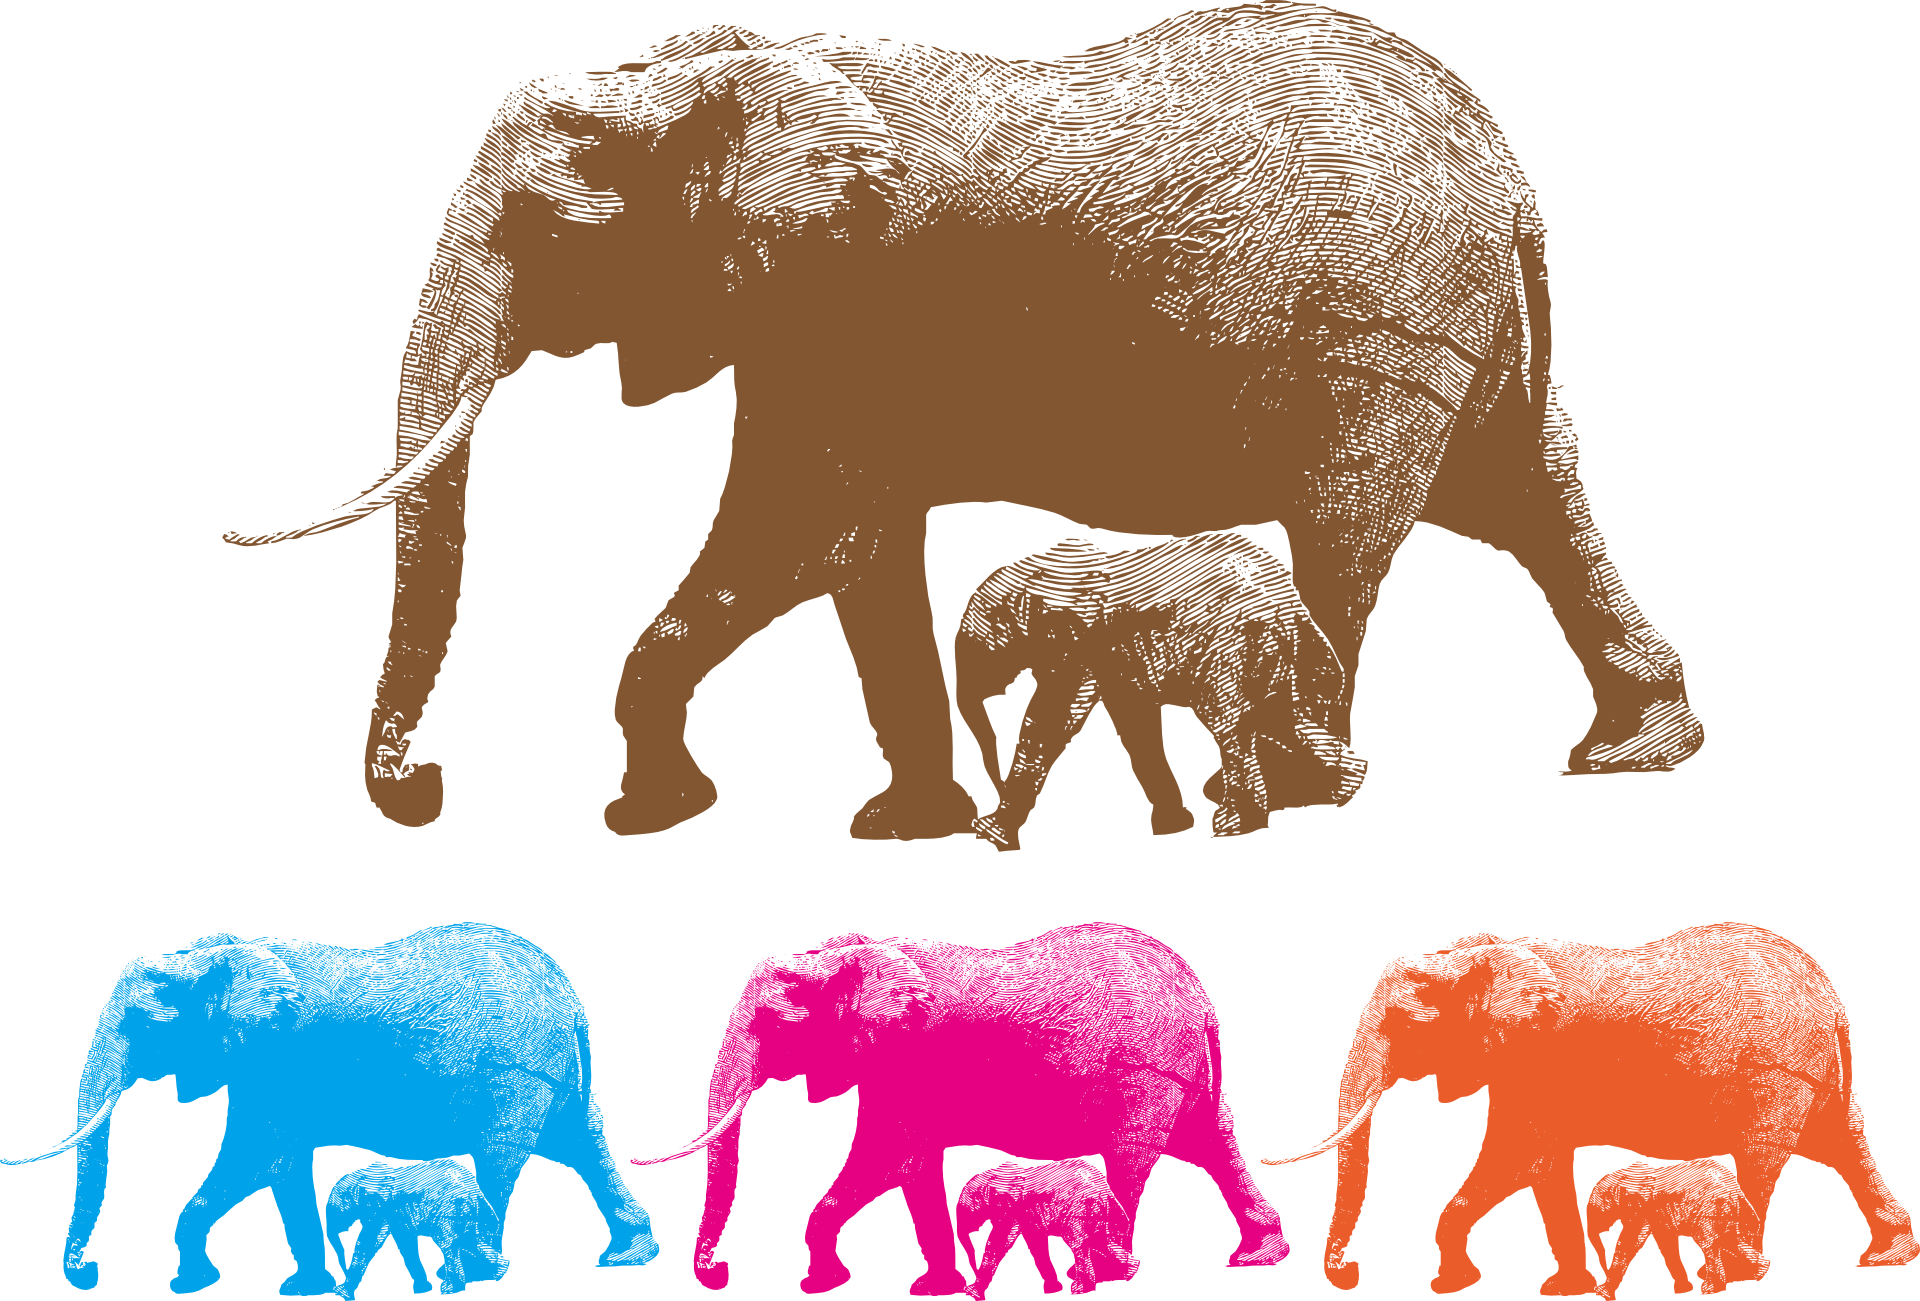 Variety Of Elephants In A Colorful Picture Free Image Download 9952